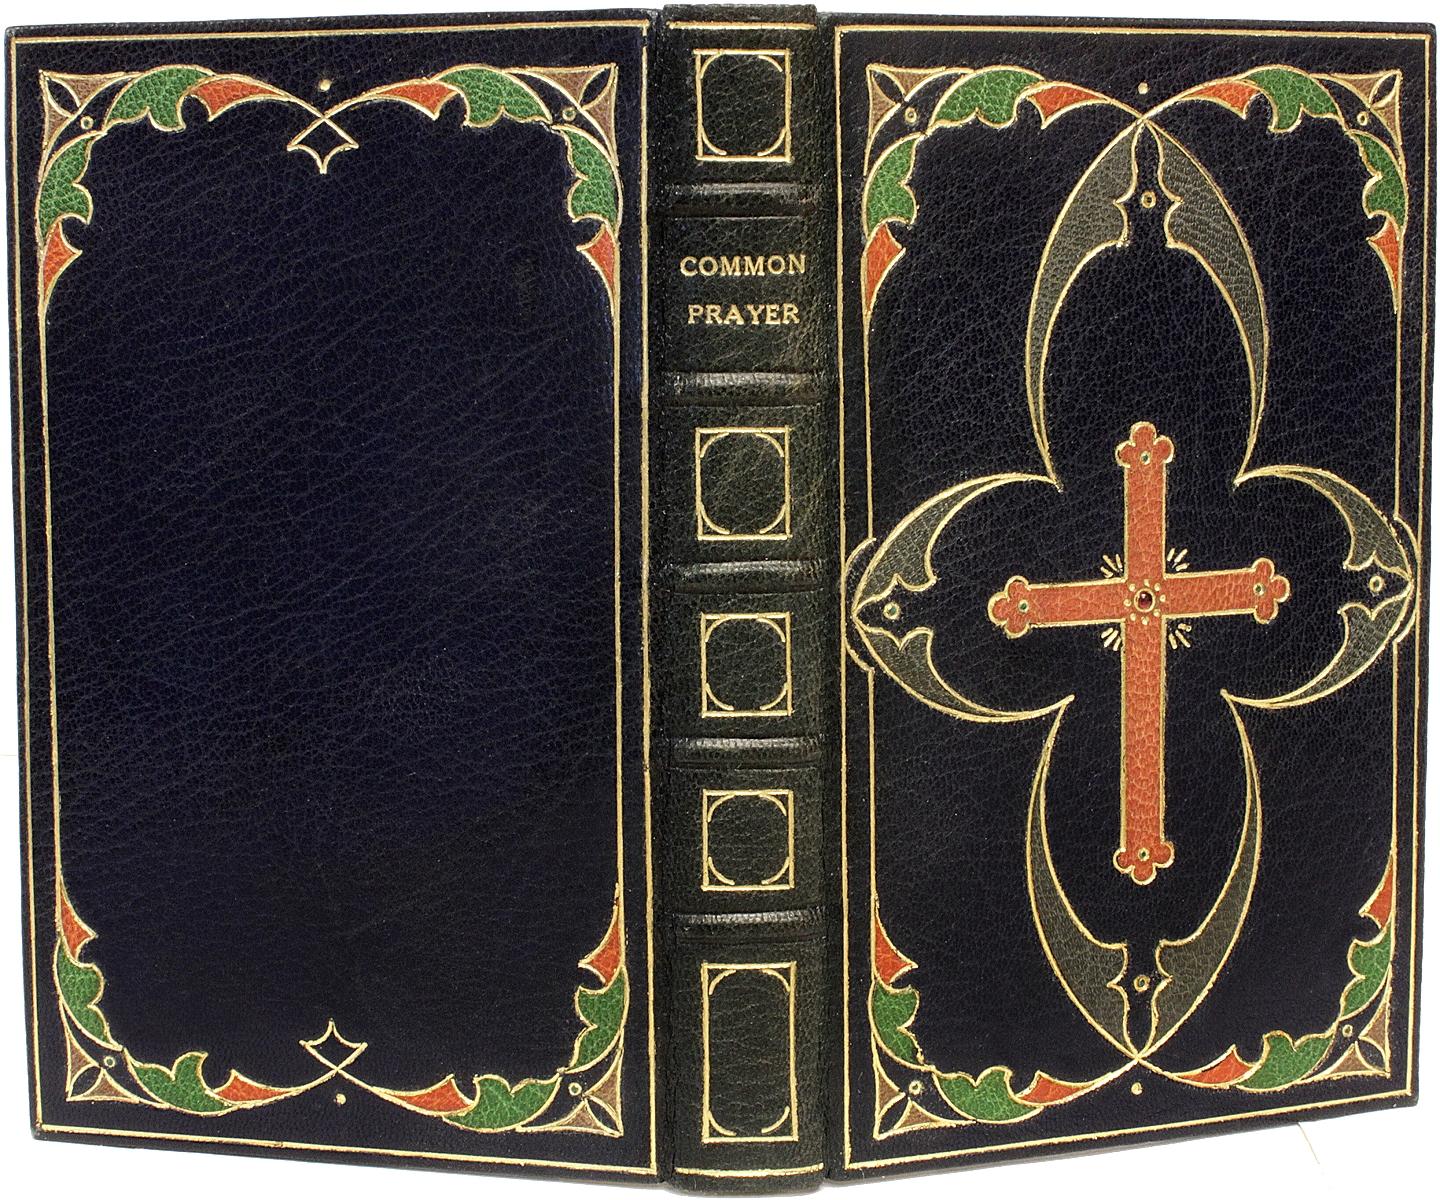 Author: PROTESTANT EPISCOPAL CHURCH. 

Title: The Book Of Common Prayer - WITH - The Hymnal.

Publisher: NY: Oxford University Press, 1907/1920.

Description: INDIA PAPER EDITION. 2 vols., 6